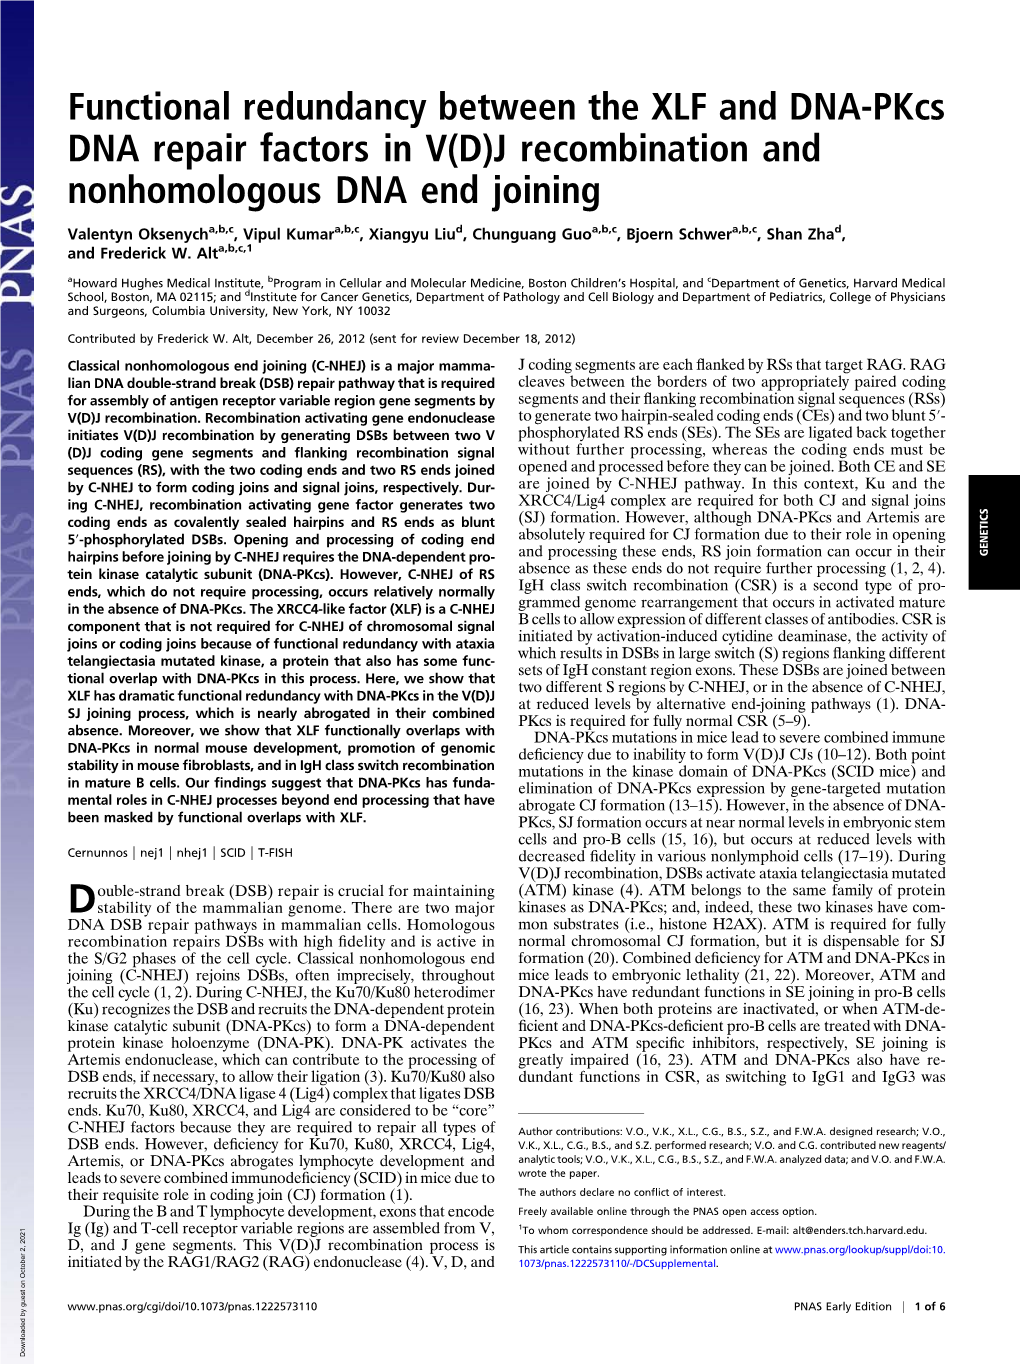 J Recombination and Nonhomologous DNA End Joining